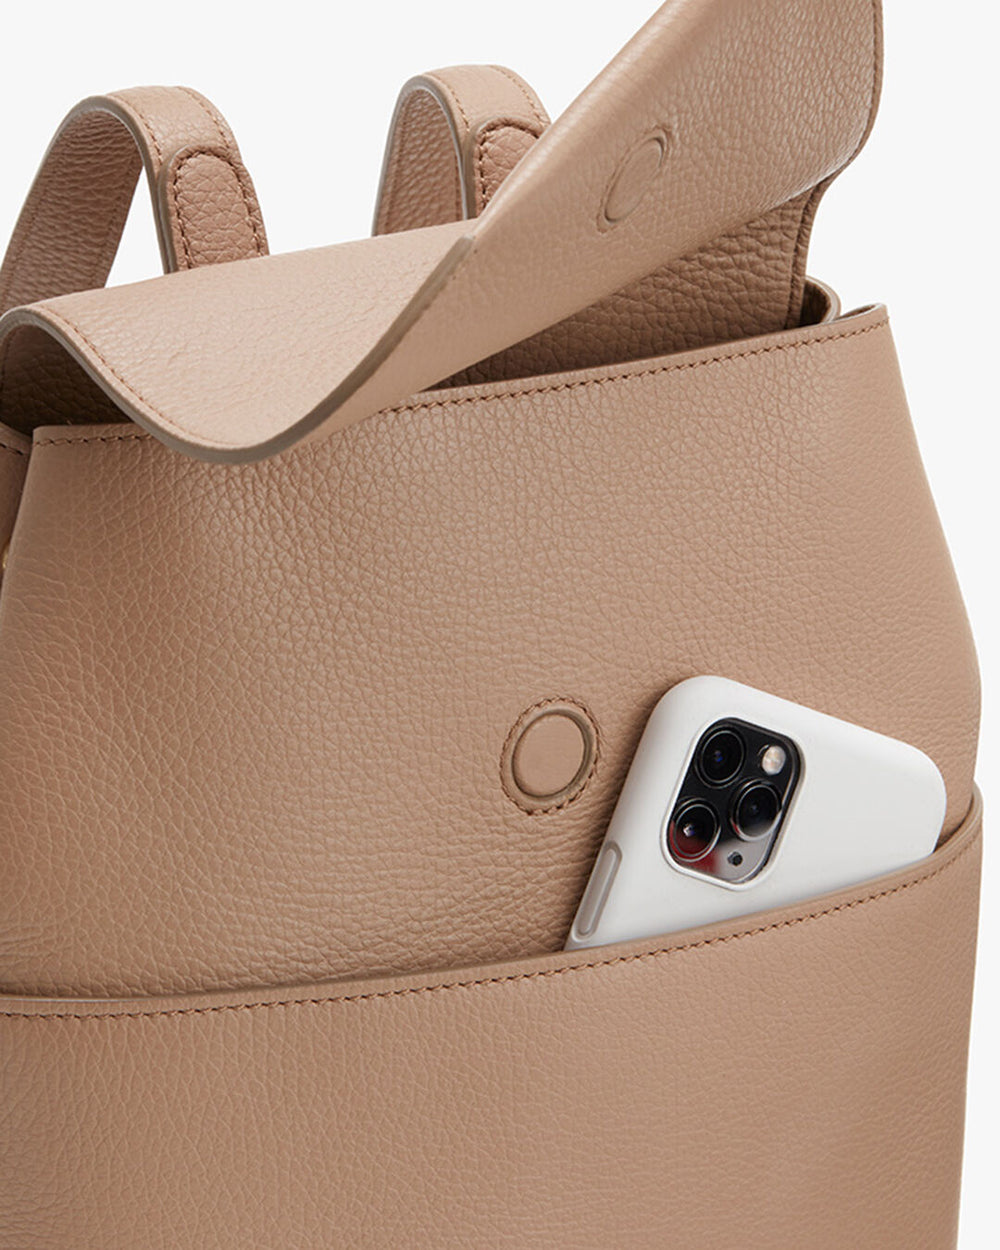 Smartphone peeking out from an open backpack.